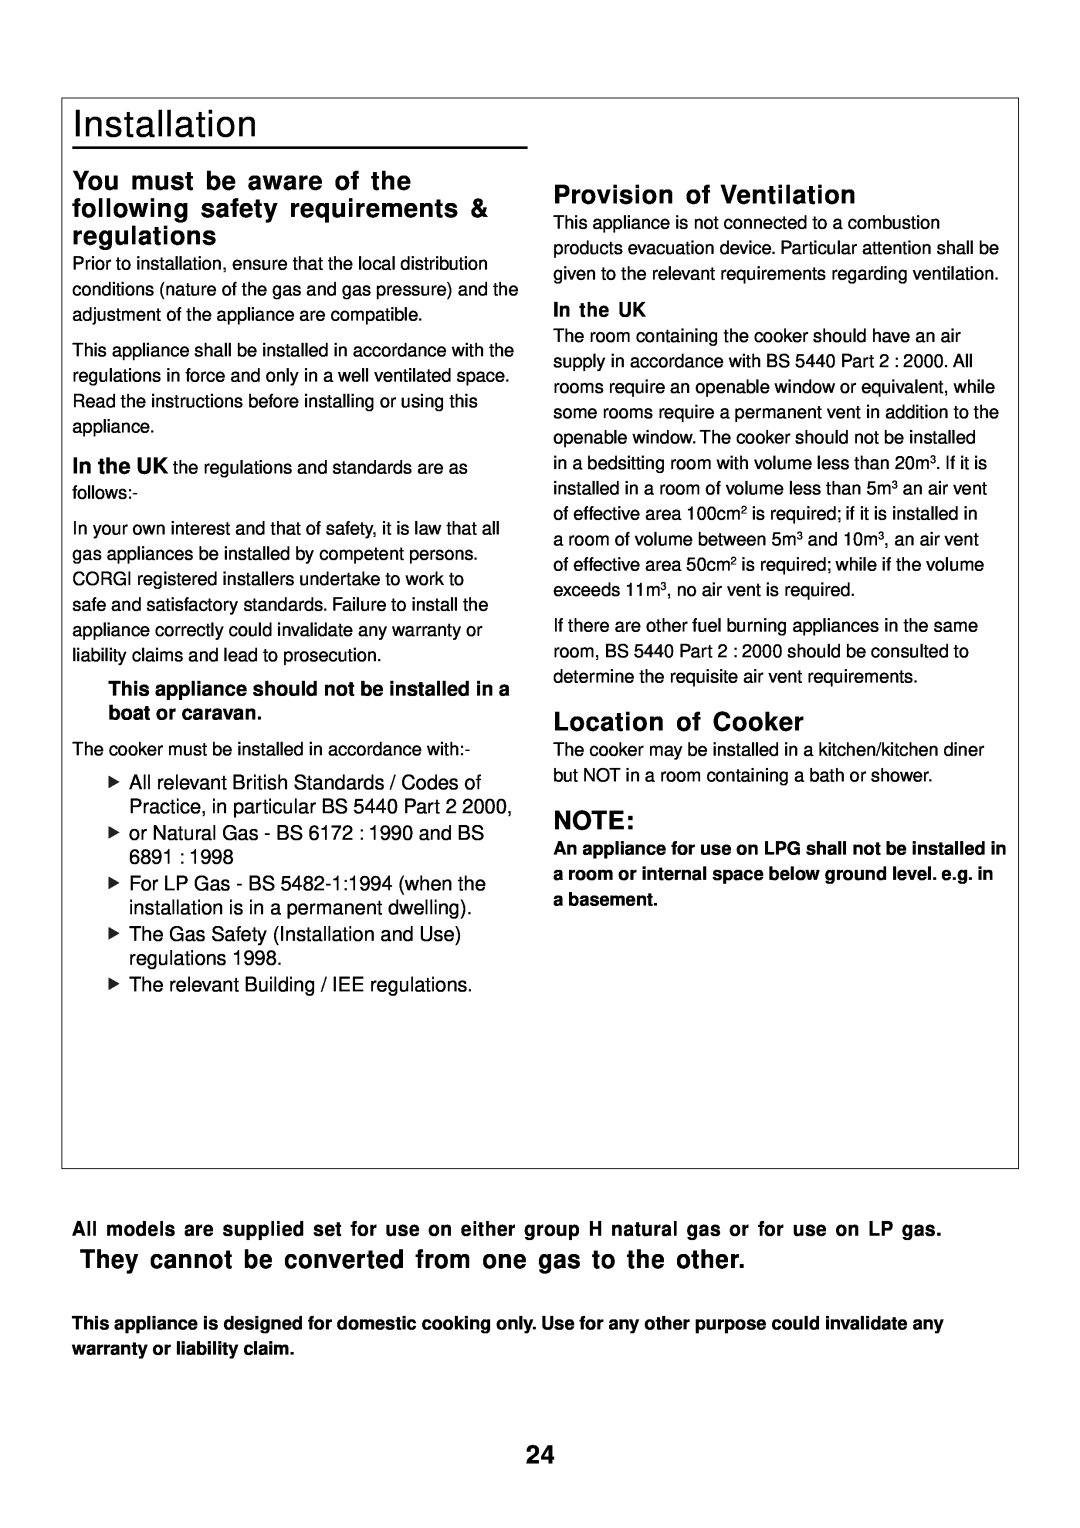 Rangemaster 90 Gas Installation, You must be aware of the following safety requirements & regulations, Location of Cooker 